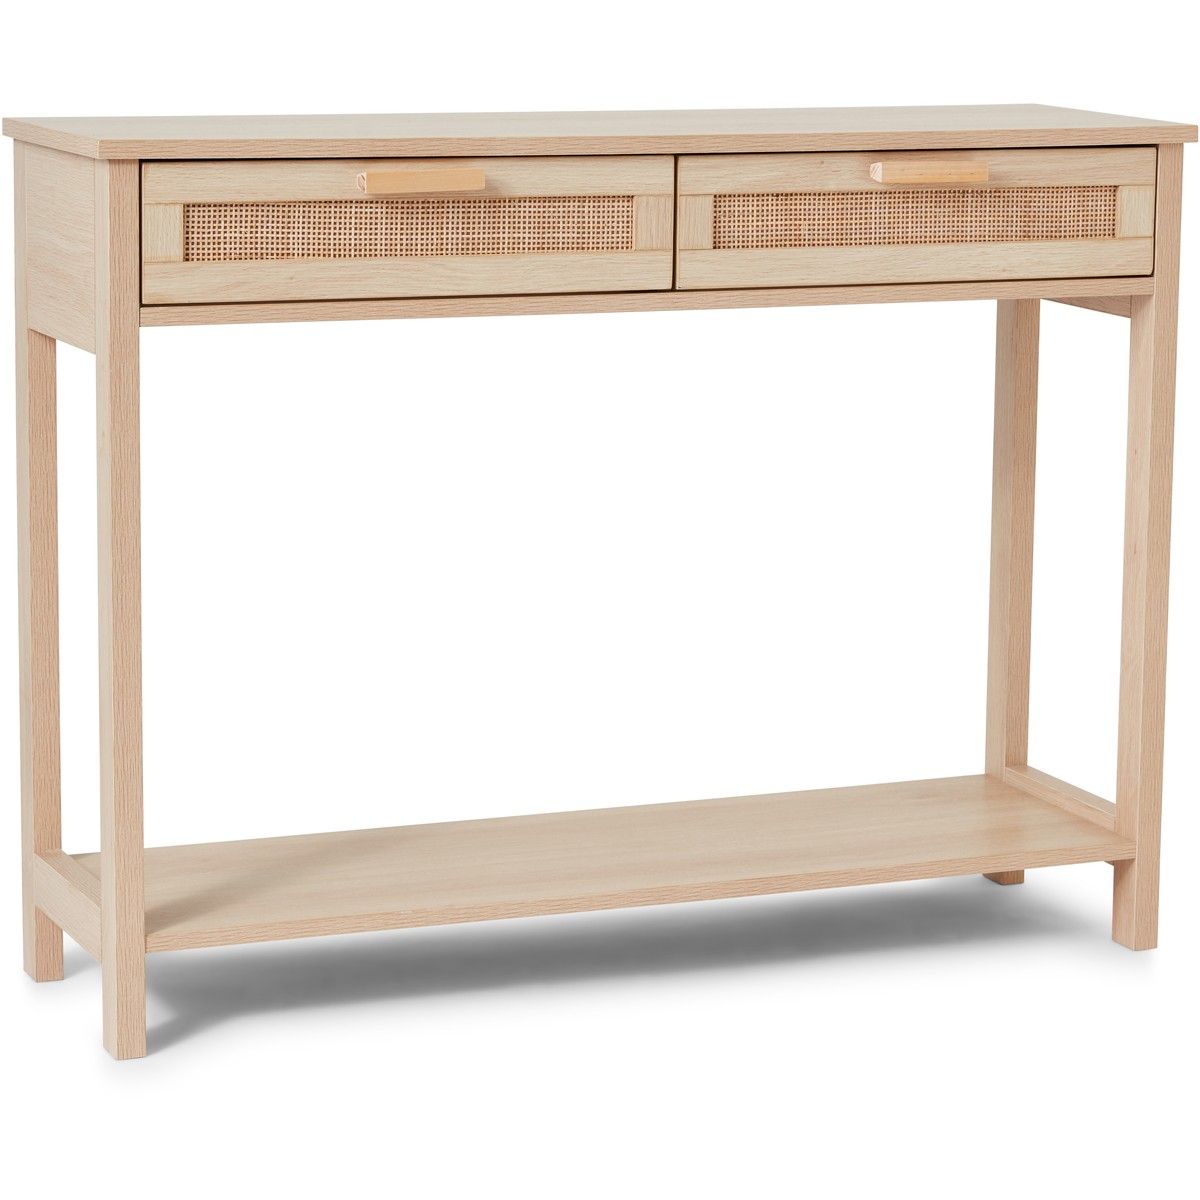 Kodu Hamilton Rattan Console Table | Big W Within Wicker Console Tables (View 4 of 20)